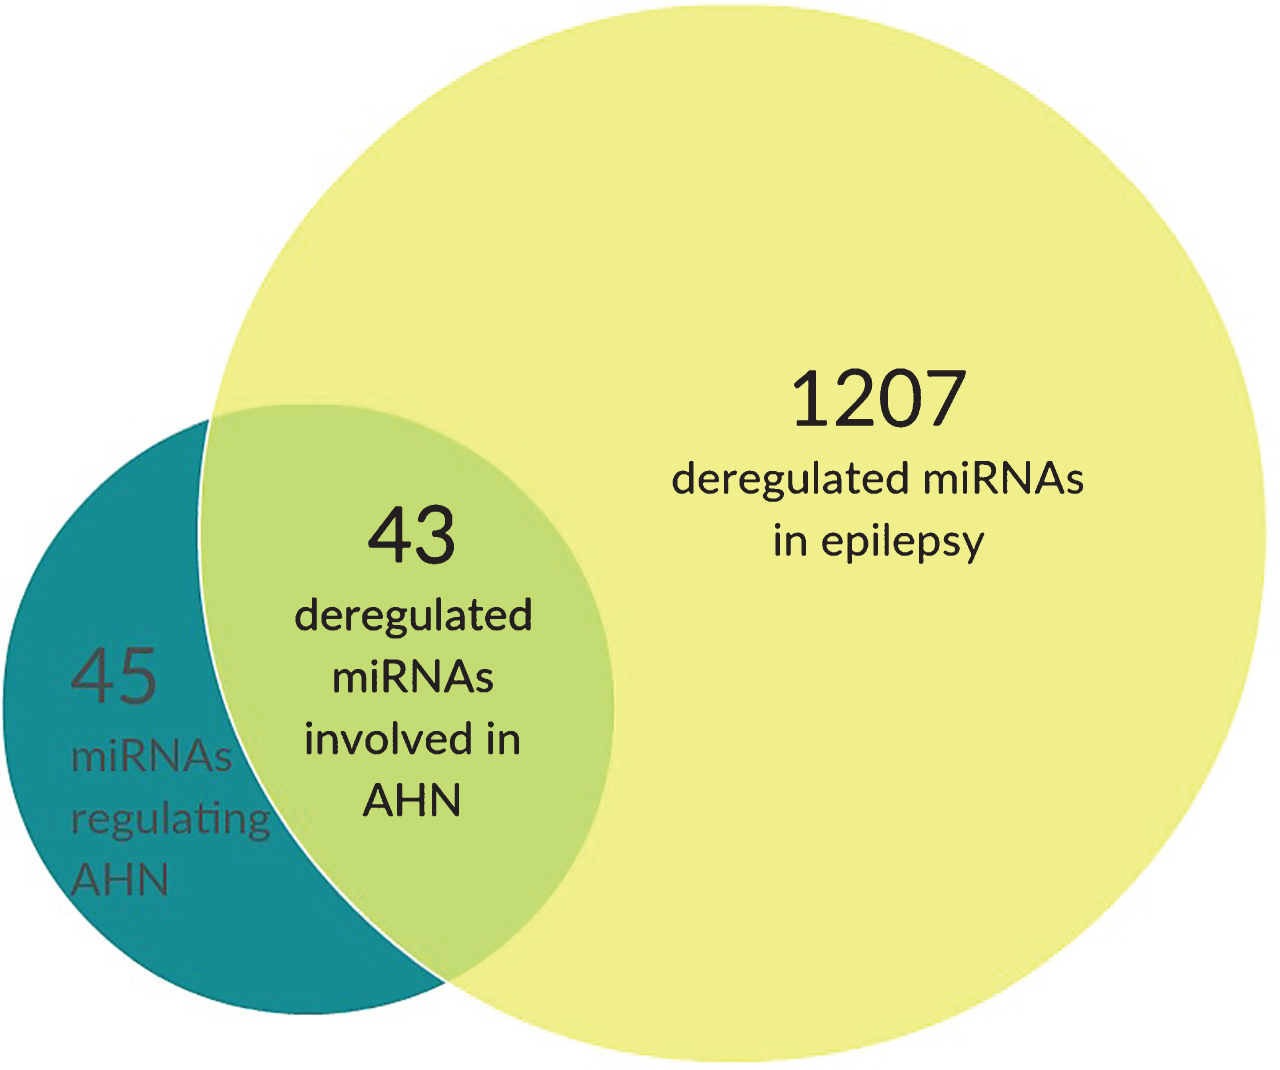 AHN-regulating miRNAs are severely deregulated in epilepsy. We have identified 45 miRNAs that are established regulators of AHN (dark green). Using the EpimiRbase, which lists a total of 1207 deregulated miRNAs in epilepsy (yellow), we identified a total of 43 out of 45 AHN-regulating miRNAs to be deregulated in epilepsy (light green).